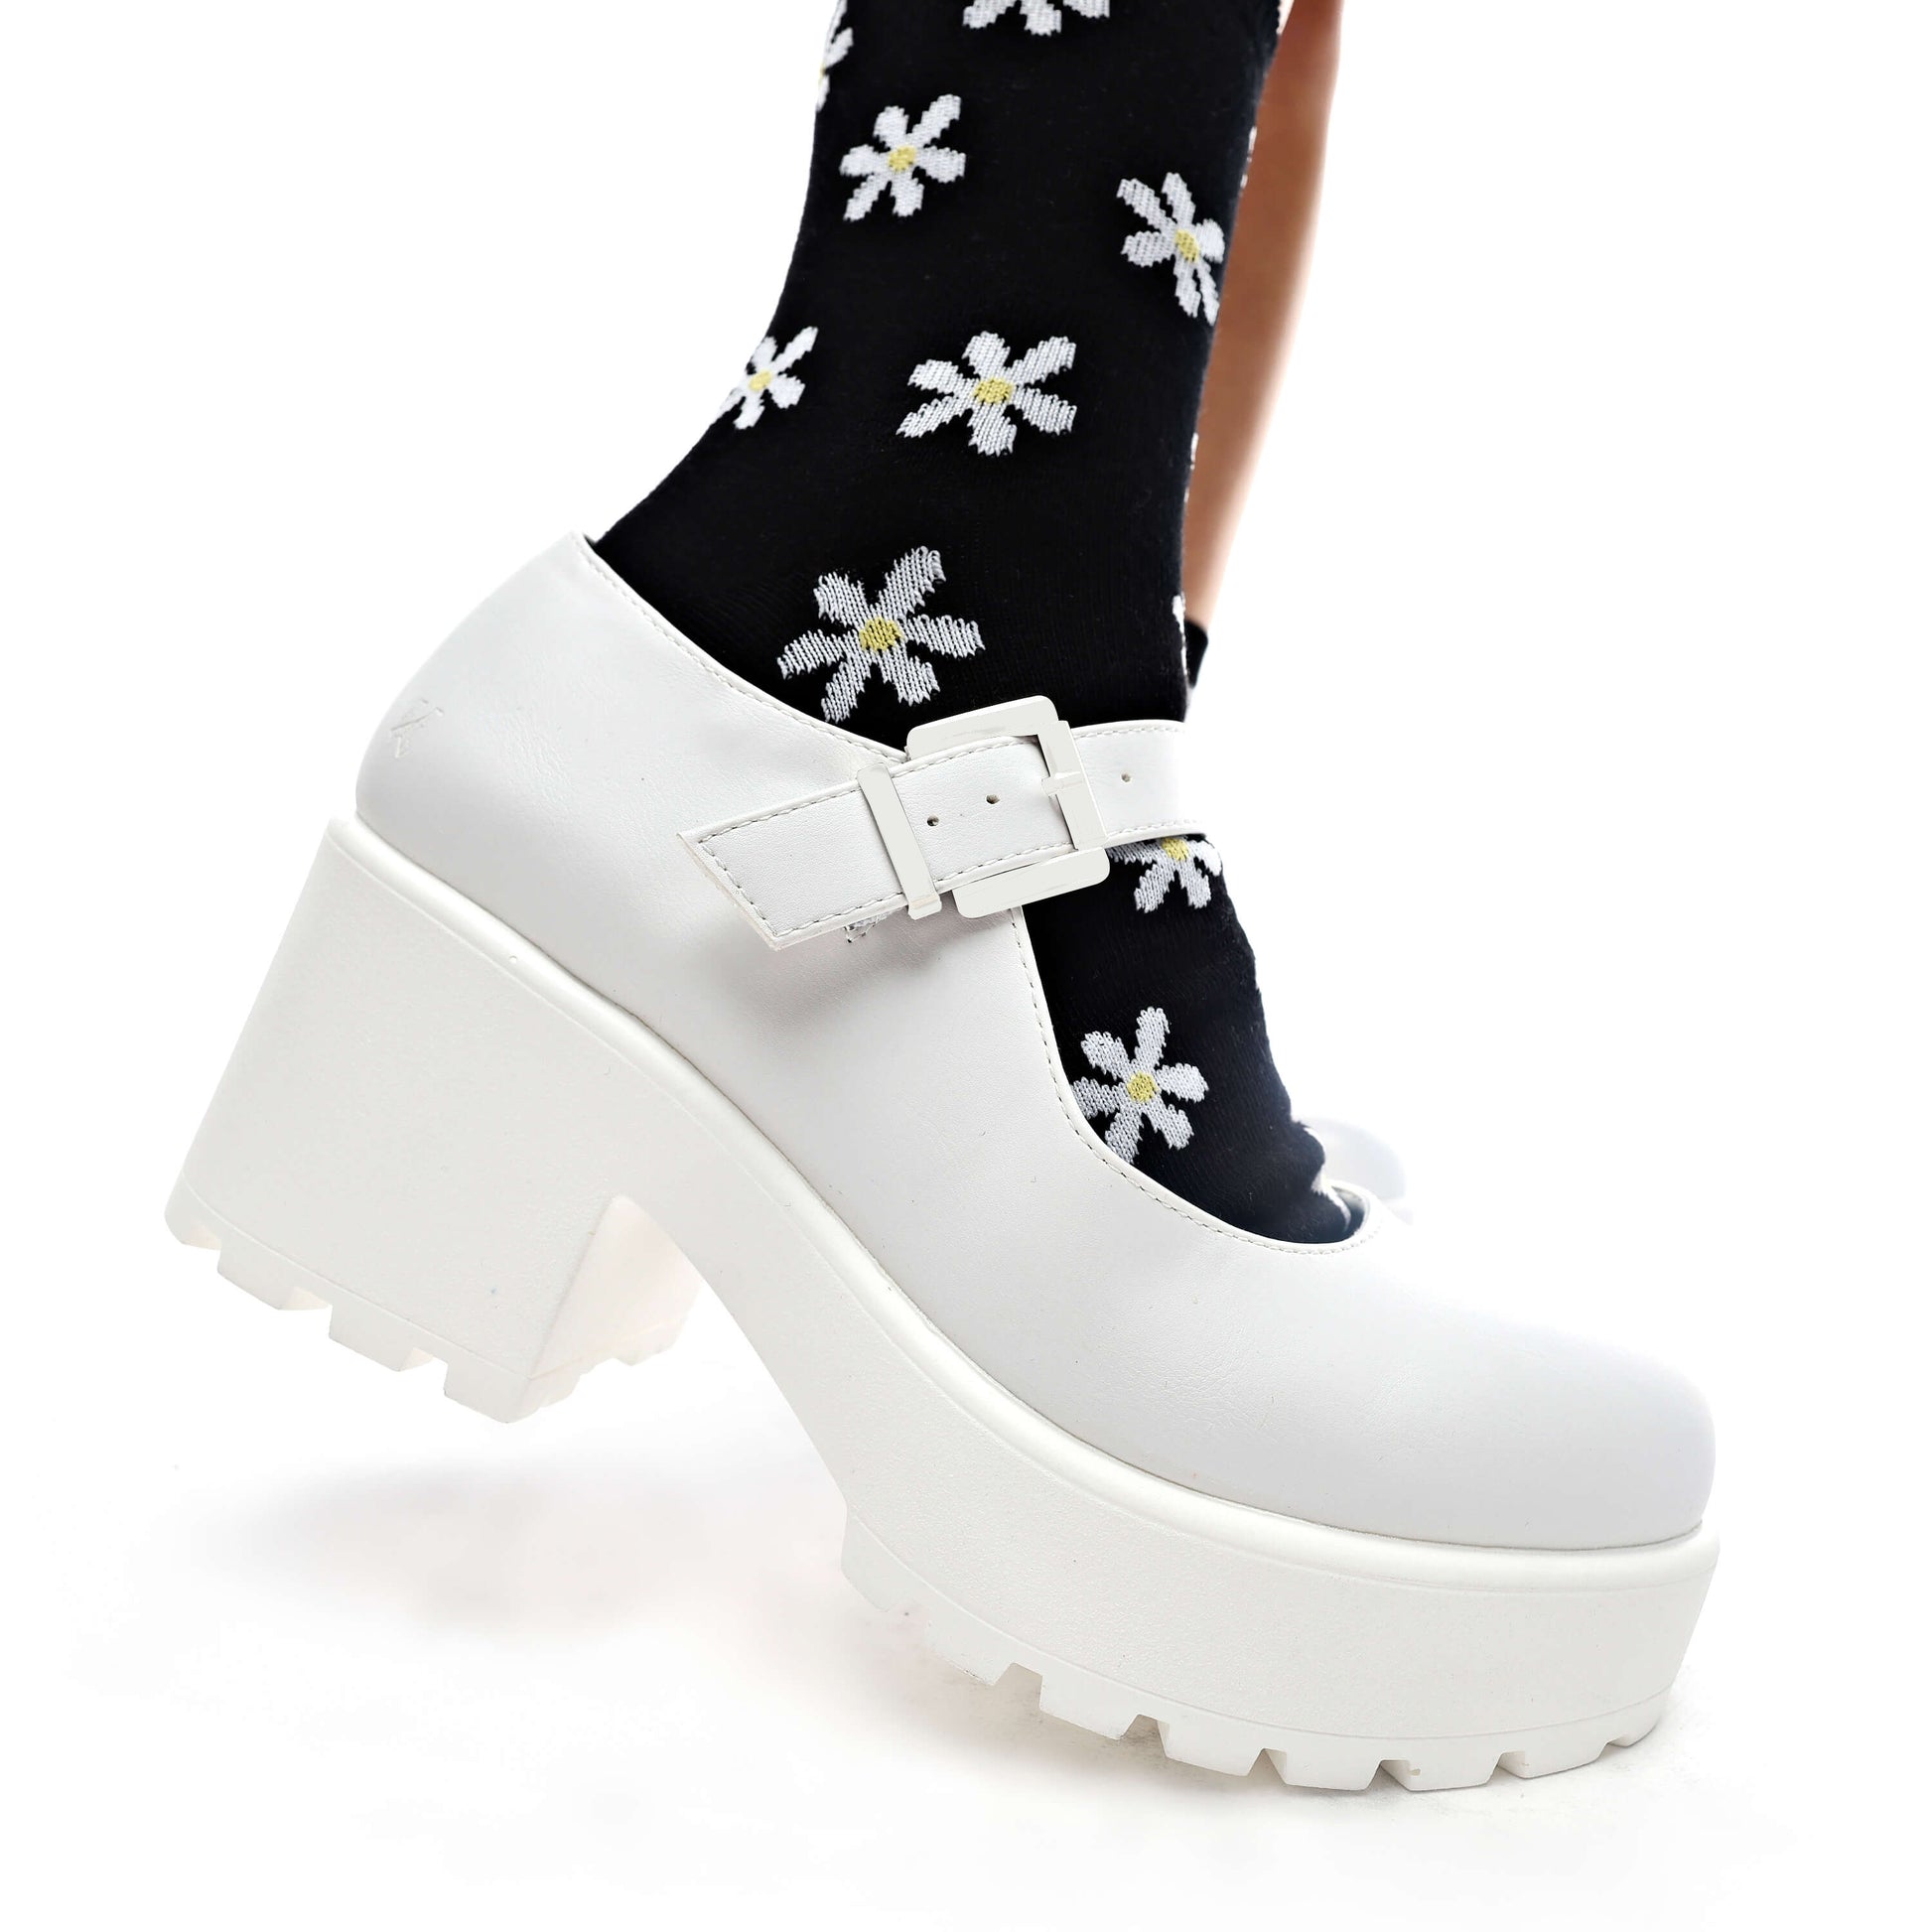 Tira Mary Jane Shoes 'White Washout Edition' - Mary Janes - KOI Footwear - White - Model Side View